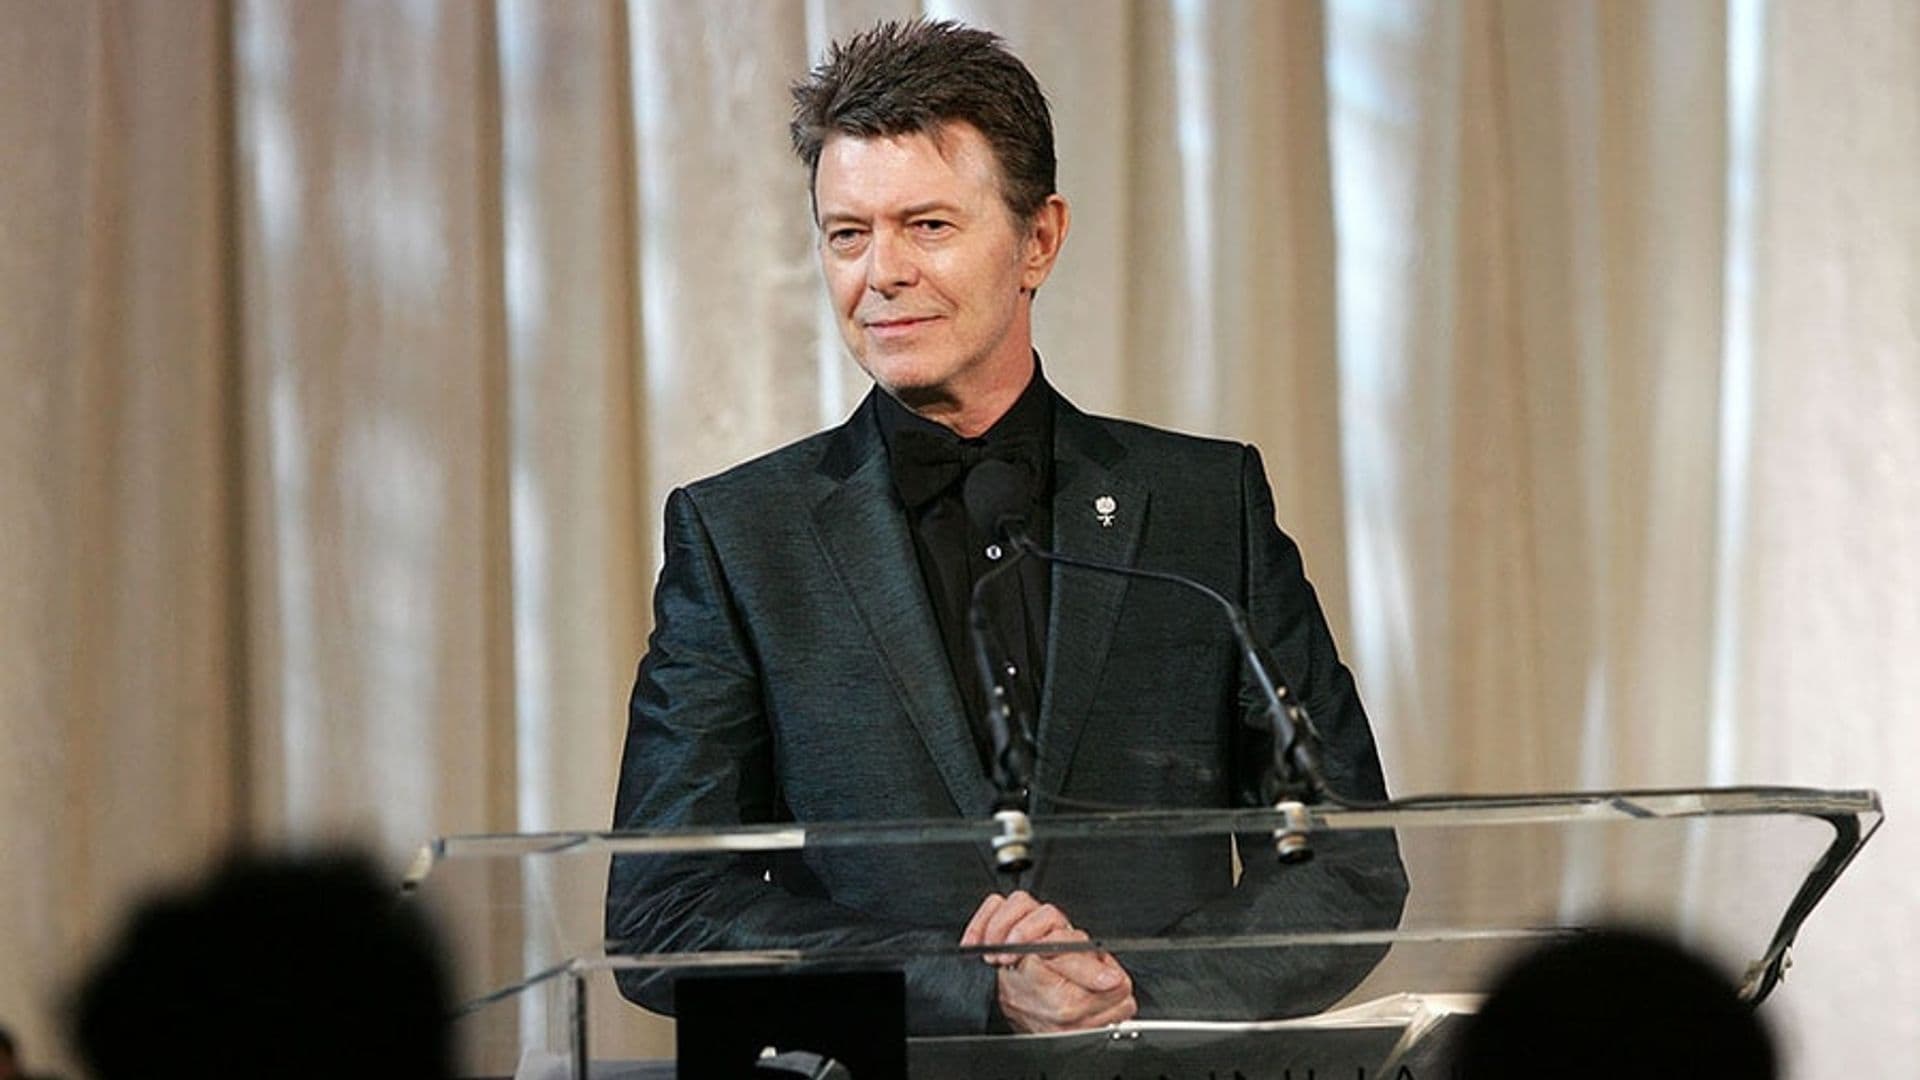 David Bowie will be honored at the CFDA Fashion Awards: All the nominees